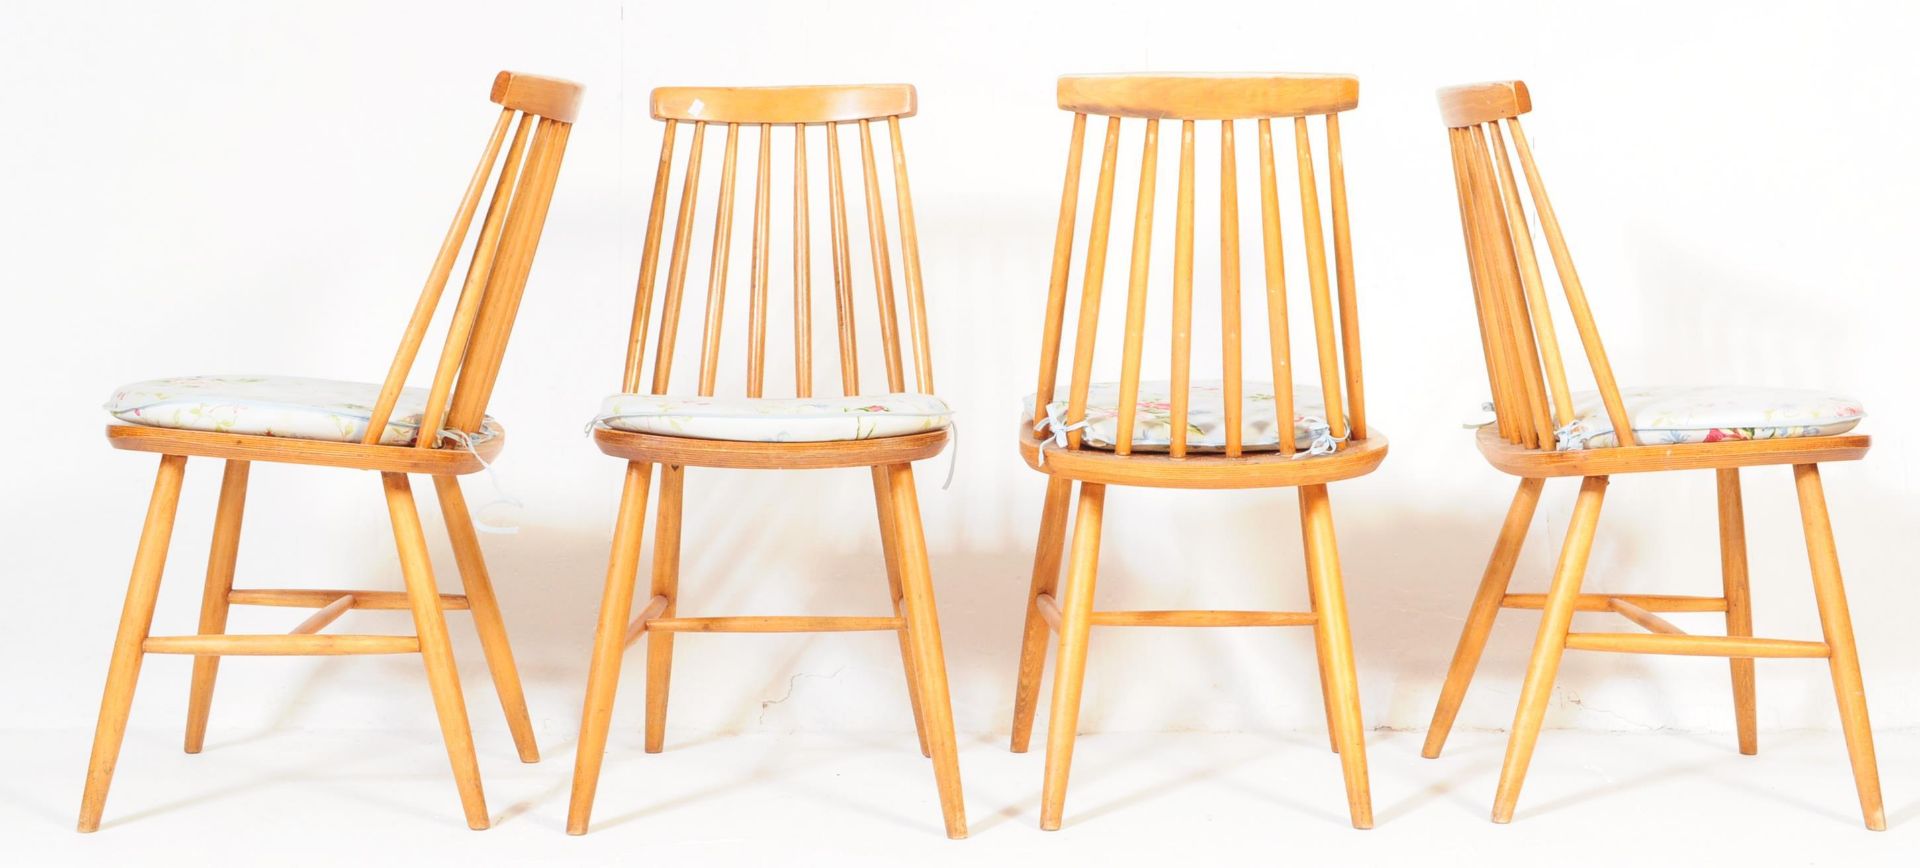 FOUR MID CENTURY ERCOL STYLE TEAK DINING CHAIRS - Image 7 of 7